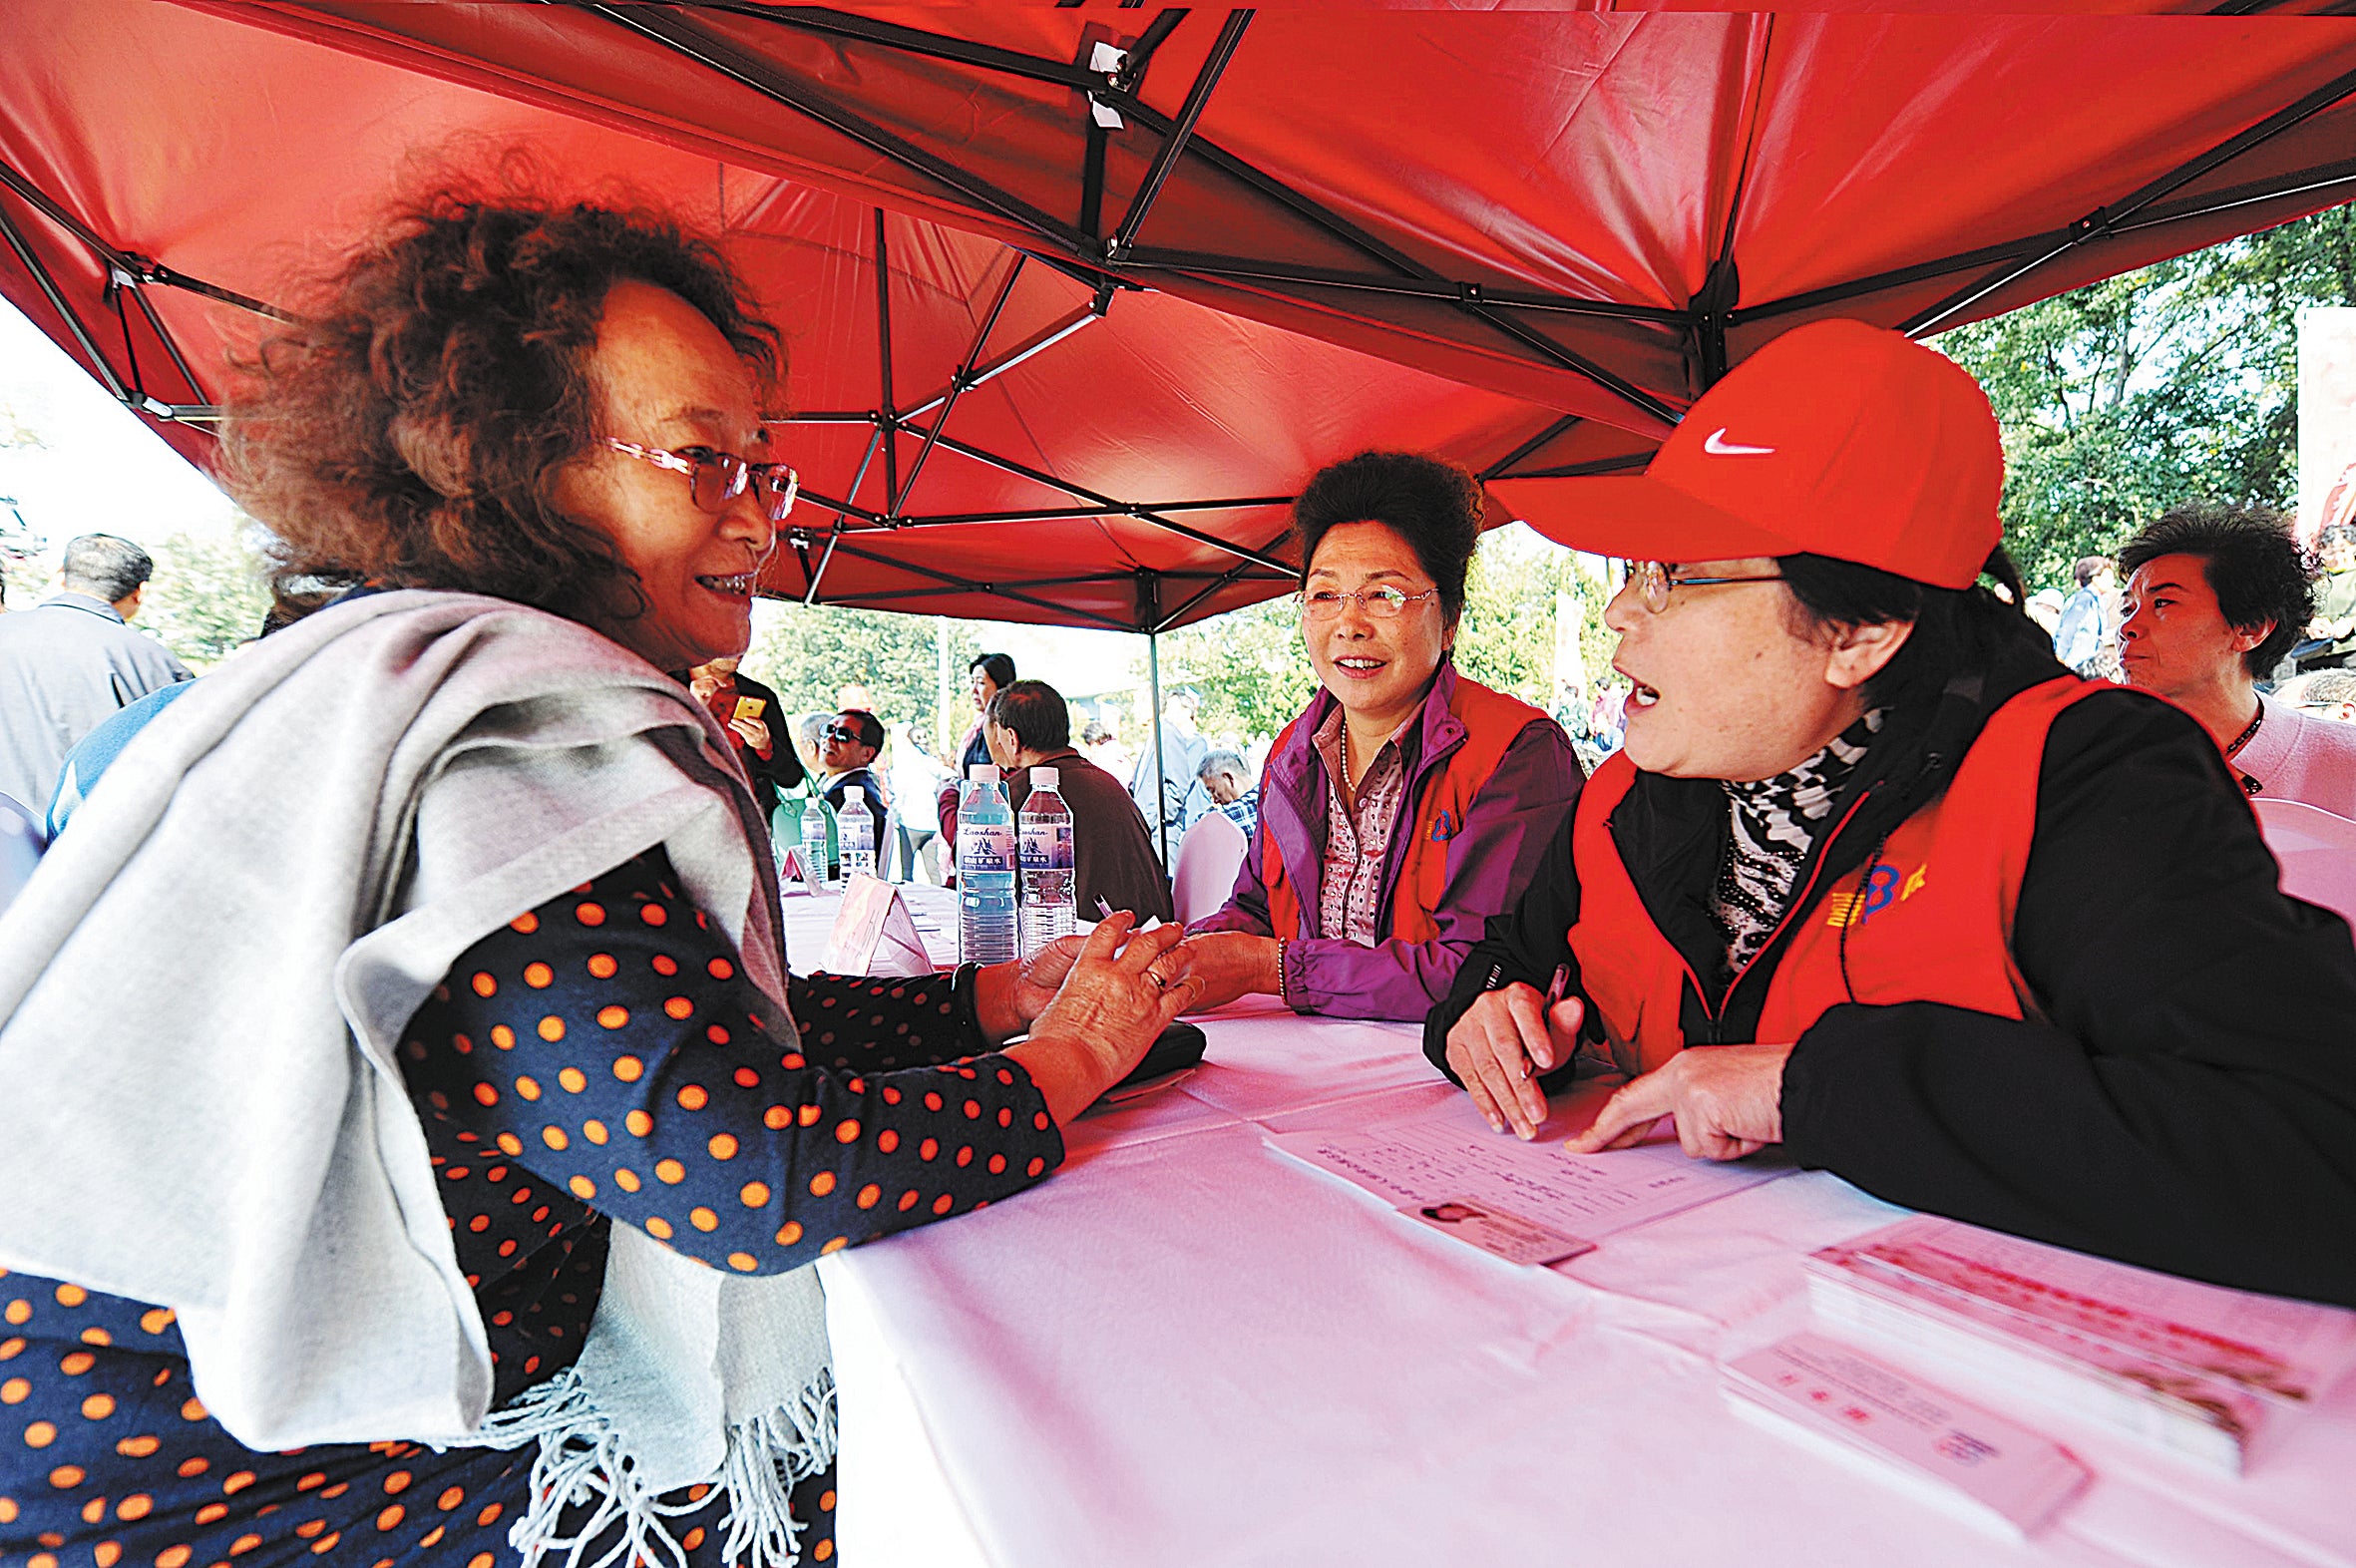 A citizen signs up for the “Single Elders” matchmaking event held in Qingdao